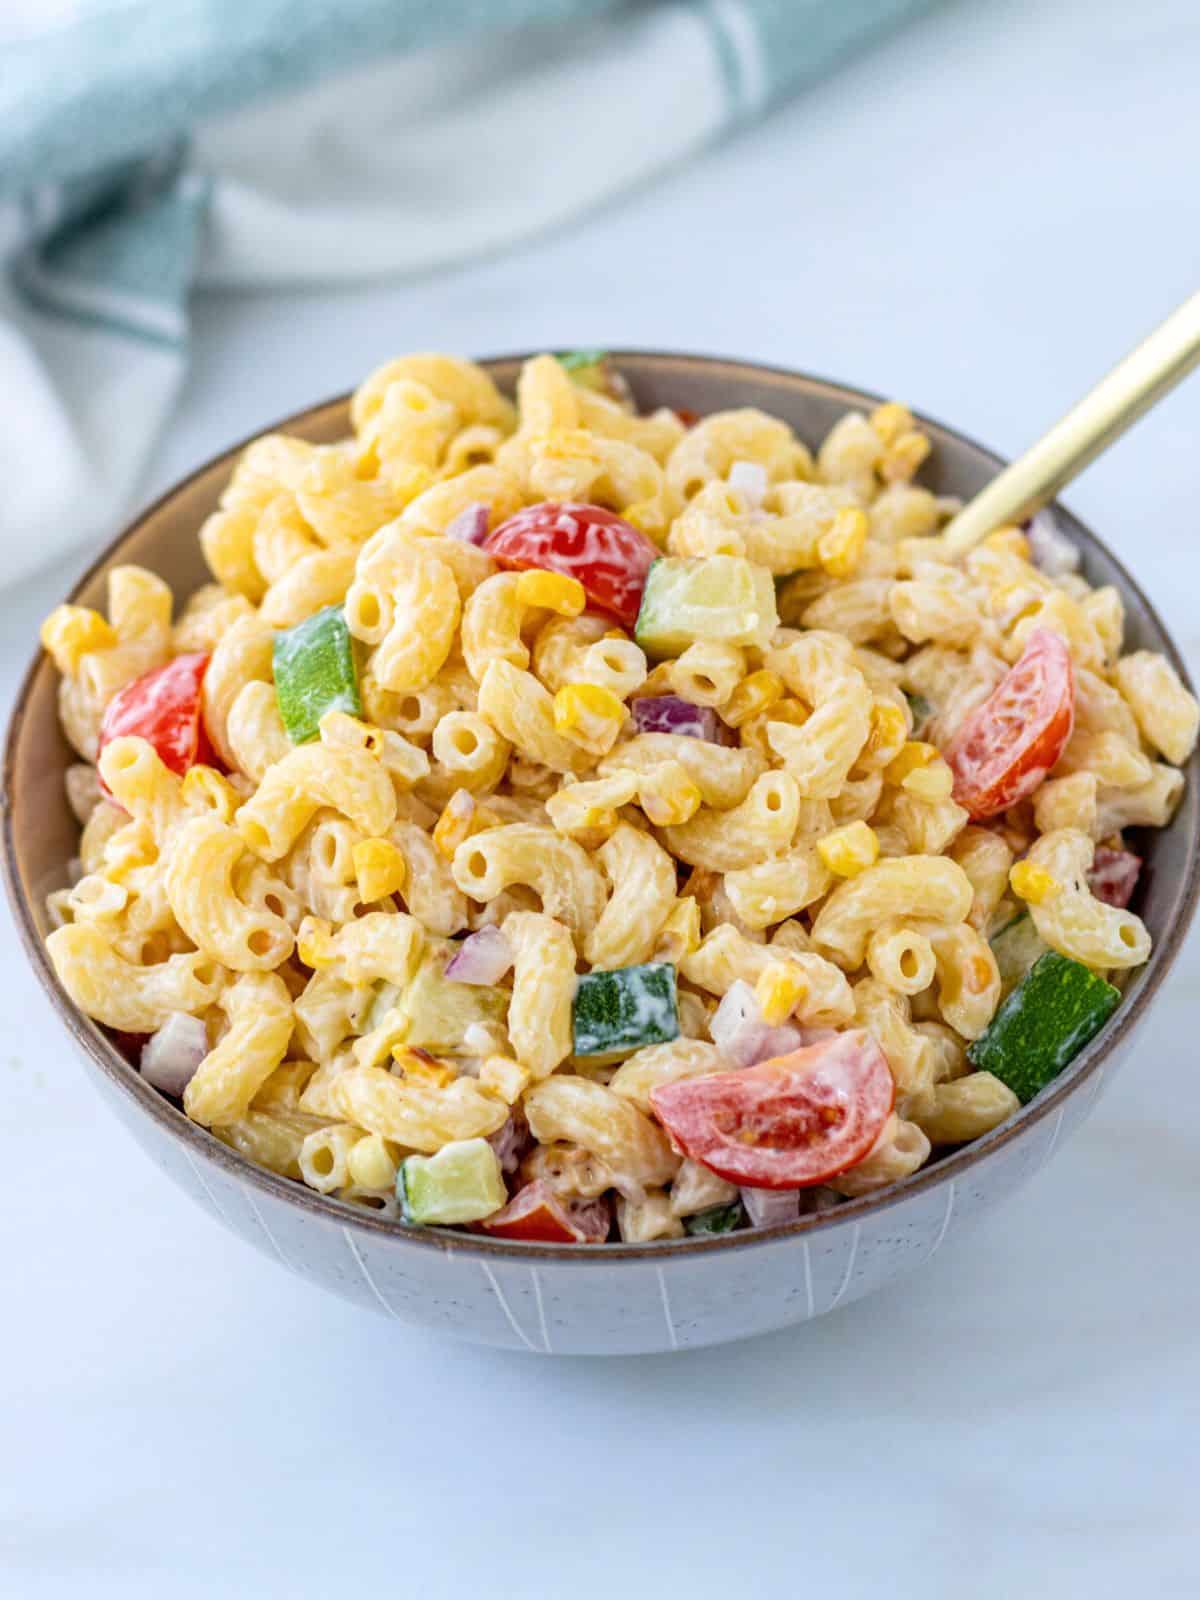 Creamy pasta salad with corn, zucchini, tomatoes, and red onion in a bowl.